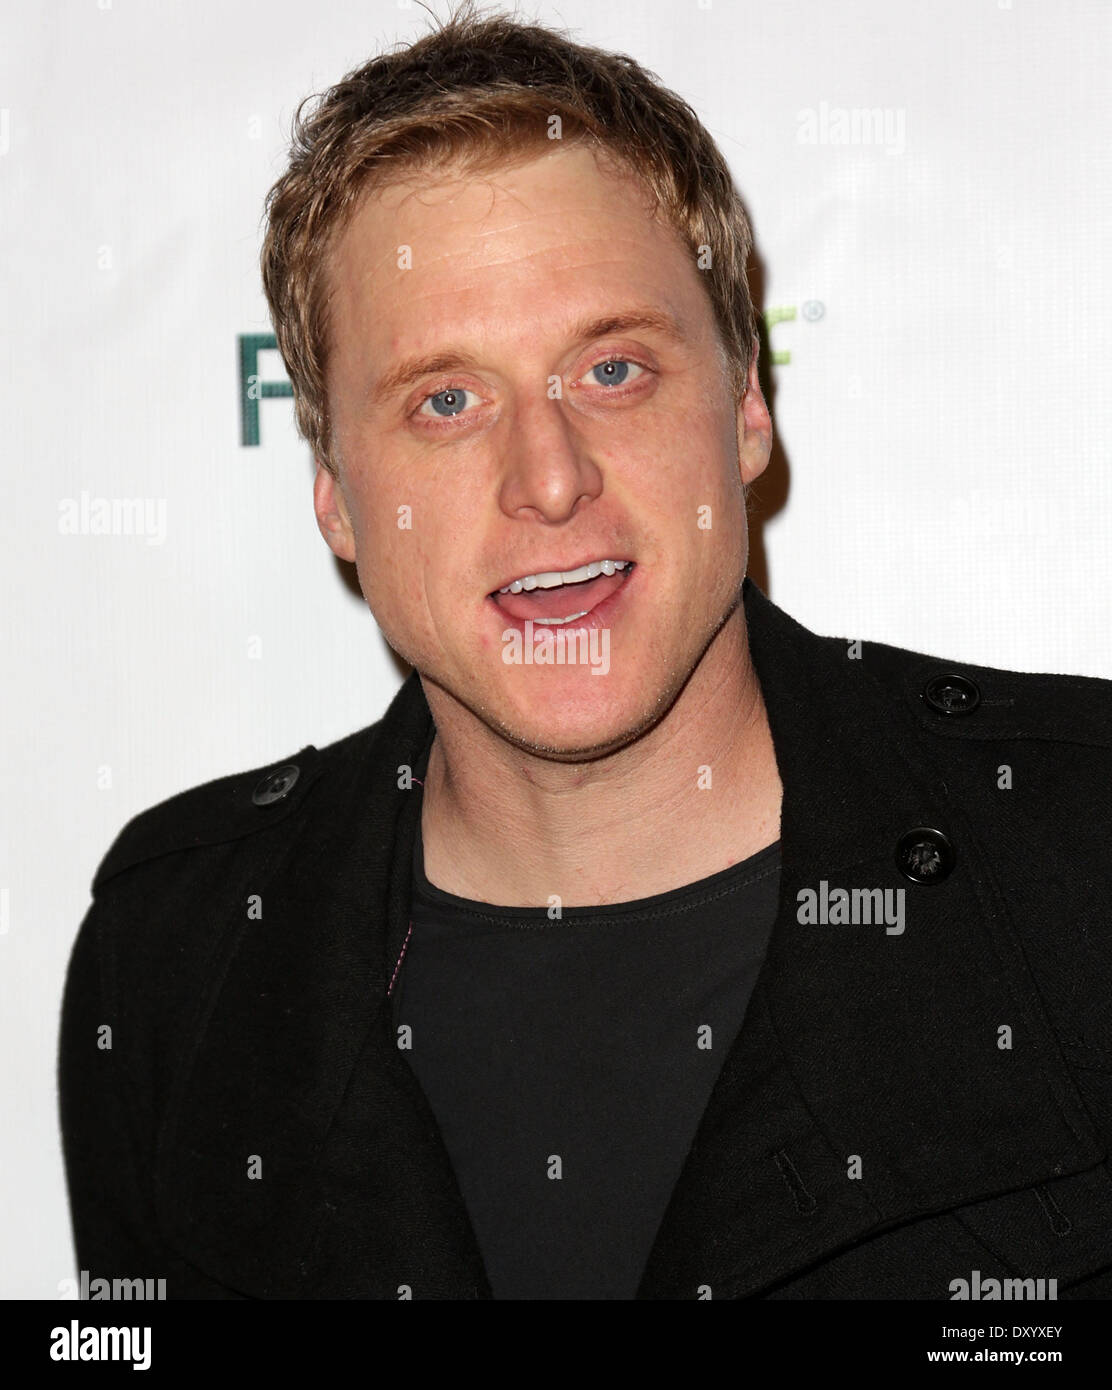 The Los Angeles premiere of 'Certainty' at Laemmle Music Hall - Arrivals Featuring: Alan Tudyk Where: Los Angeles California USA When: 27 Nov 2012 Stock Photo